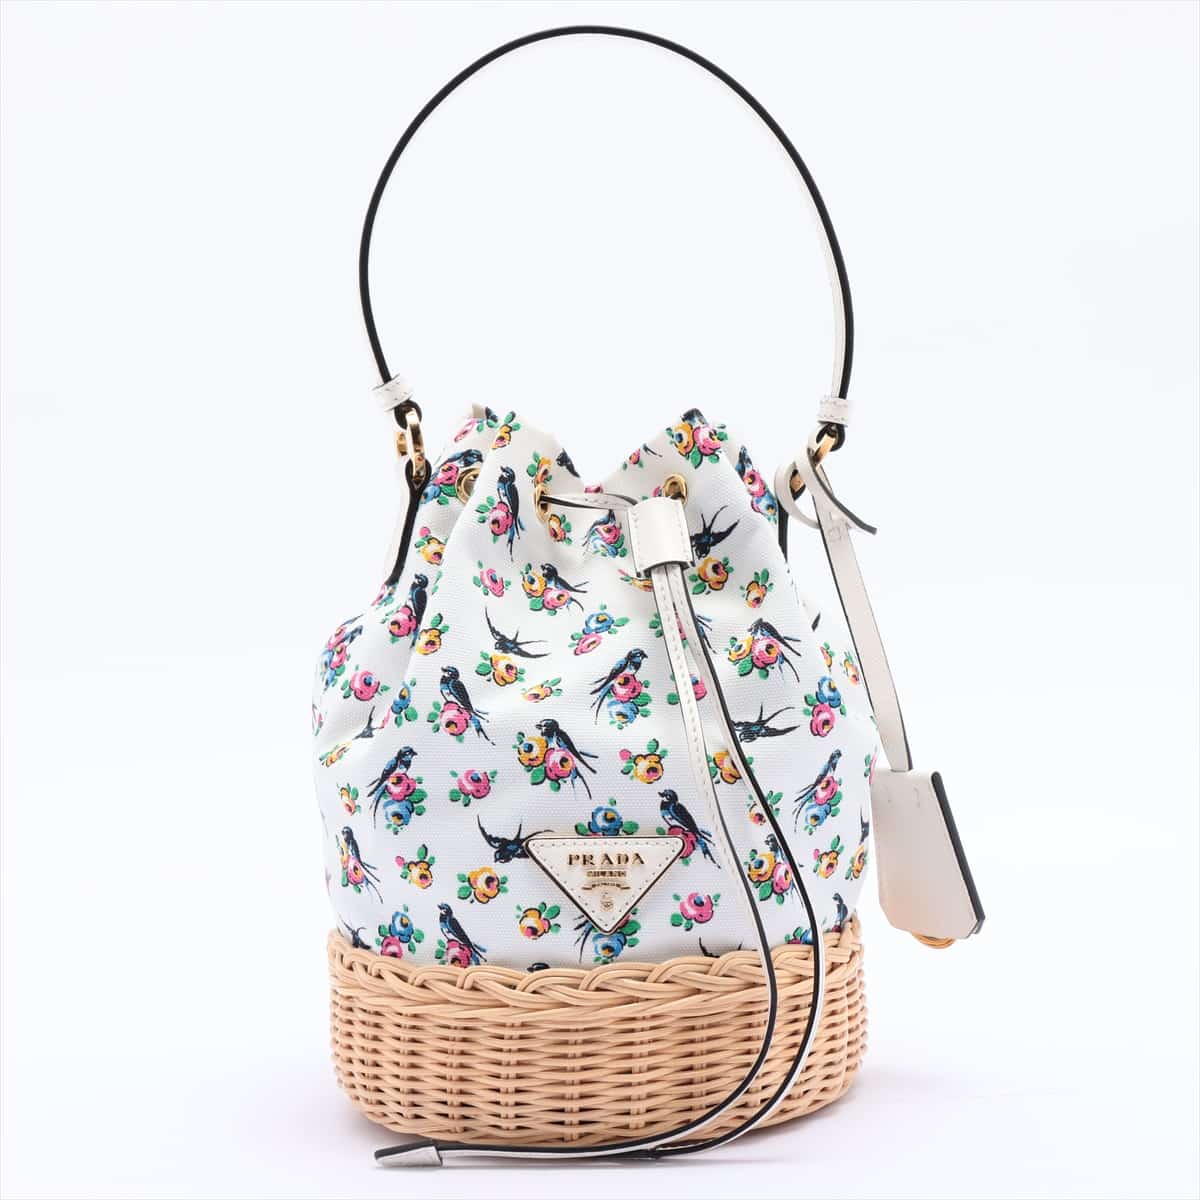 Prada Canvas & leather Straw bag White 1BE040 open papers